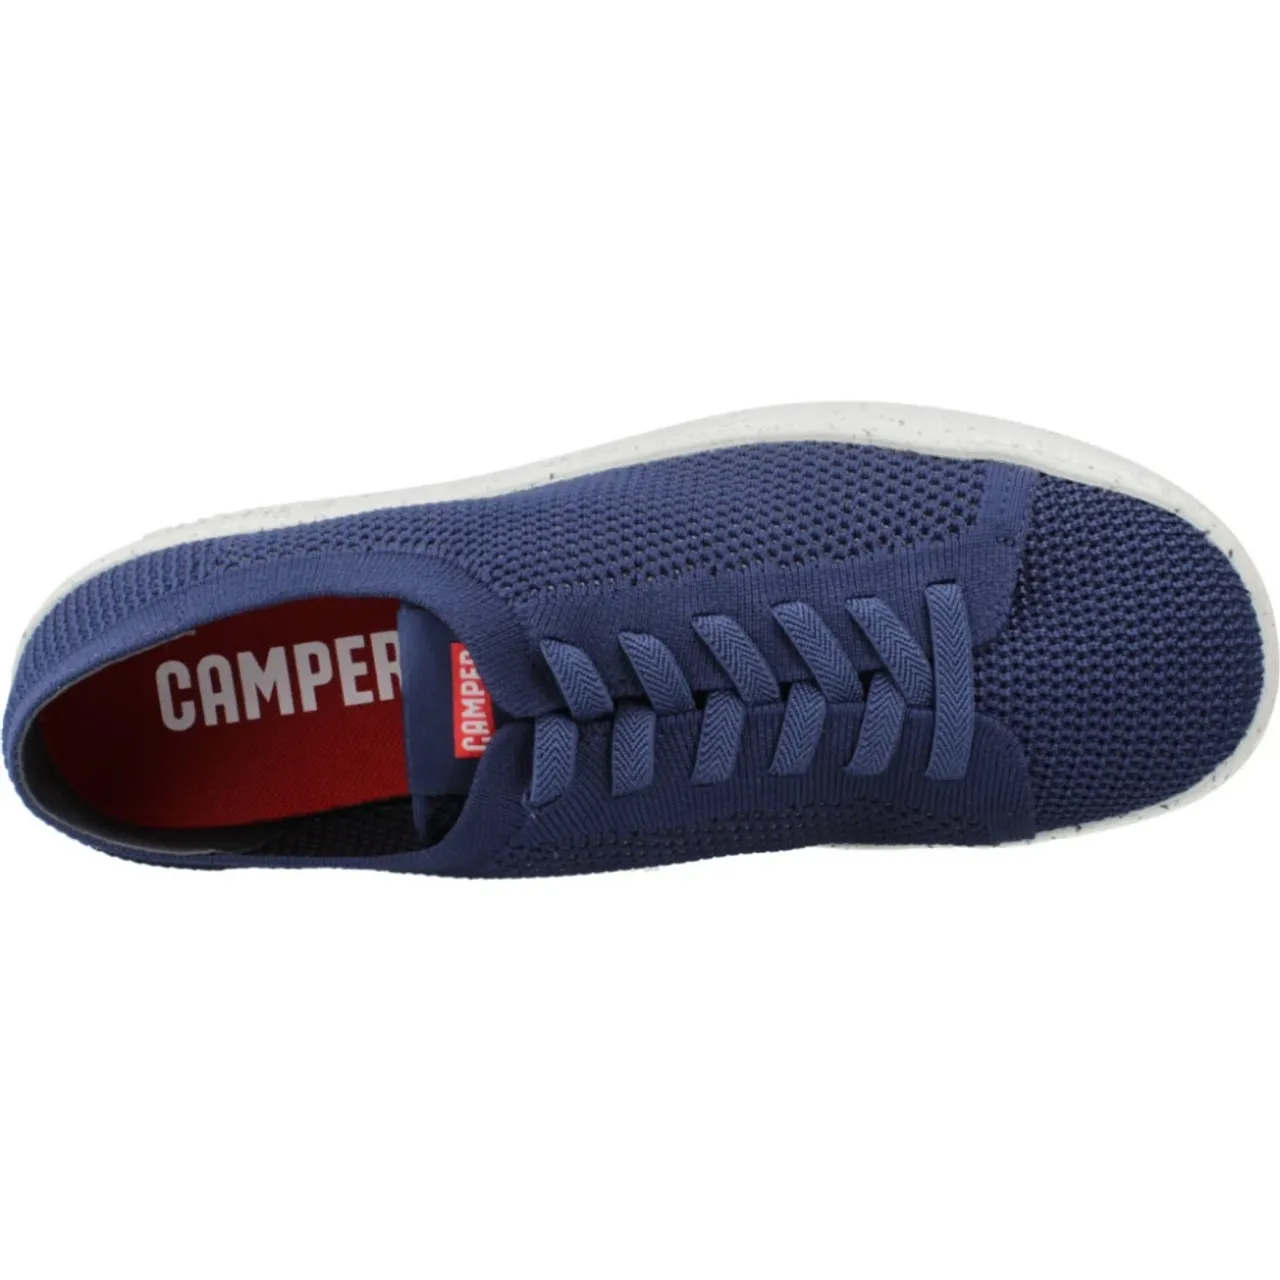 Hypnos Tour Sneakers Camper